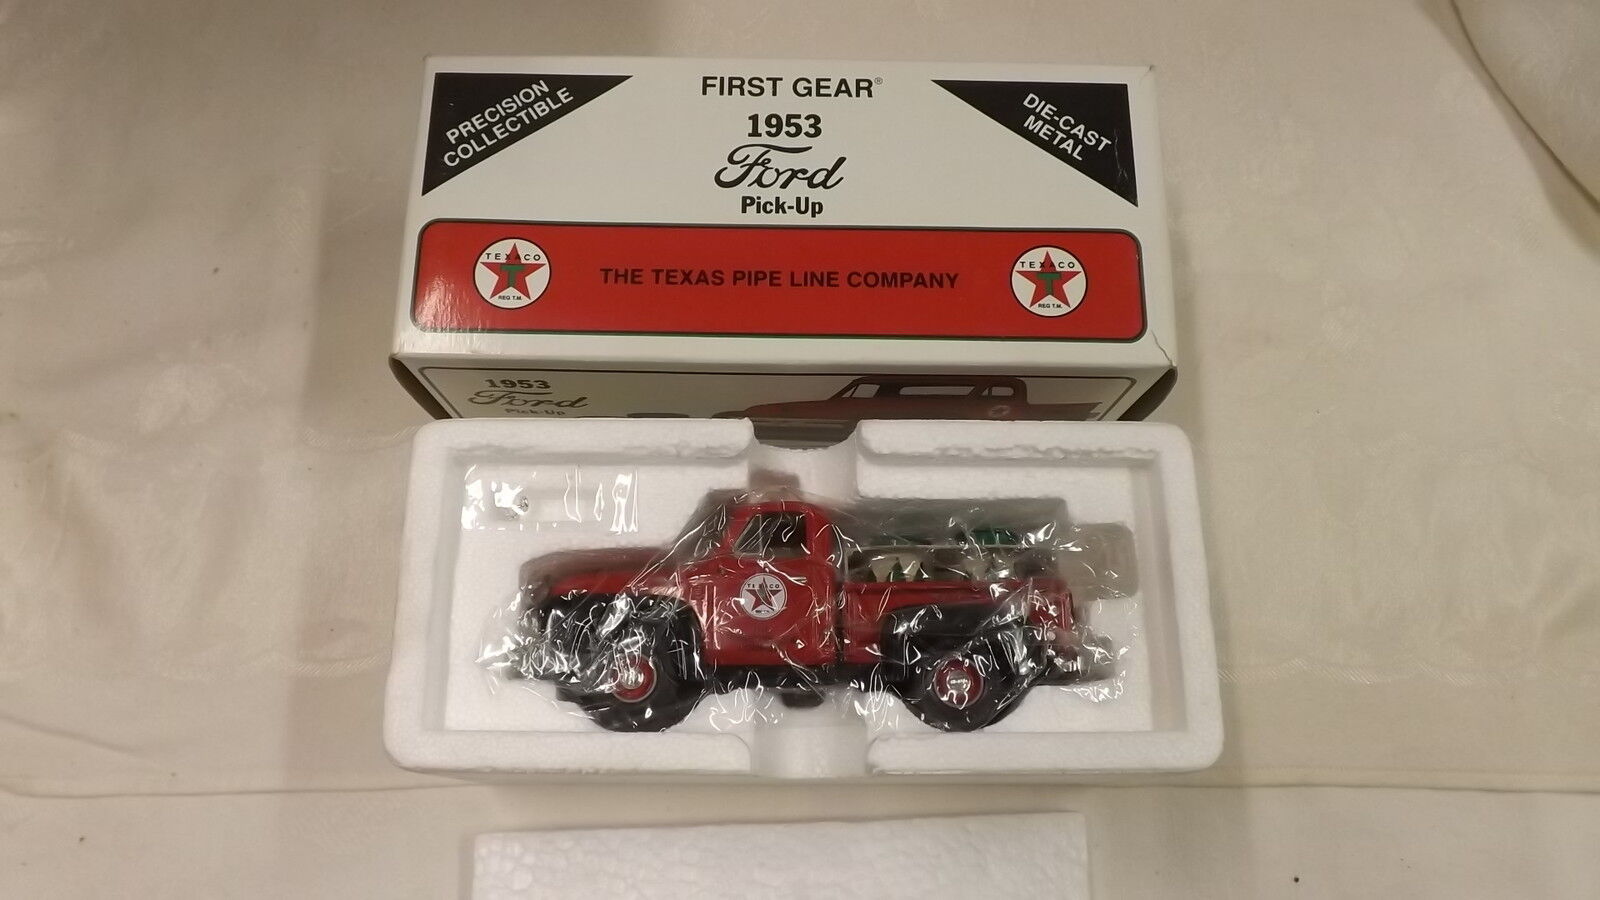 1996 First Gear Texaco Texas Pipeline Company 1953 Ford Pickup 19-1688 With Box 